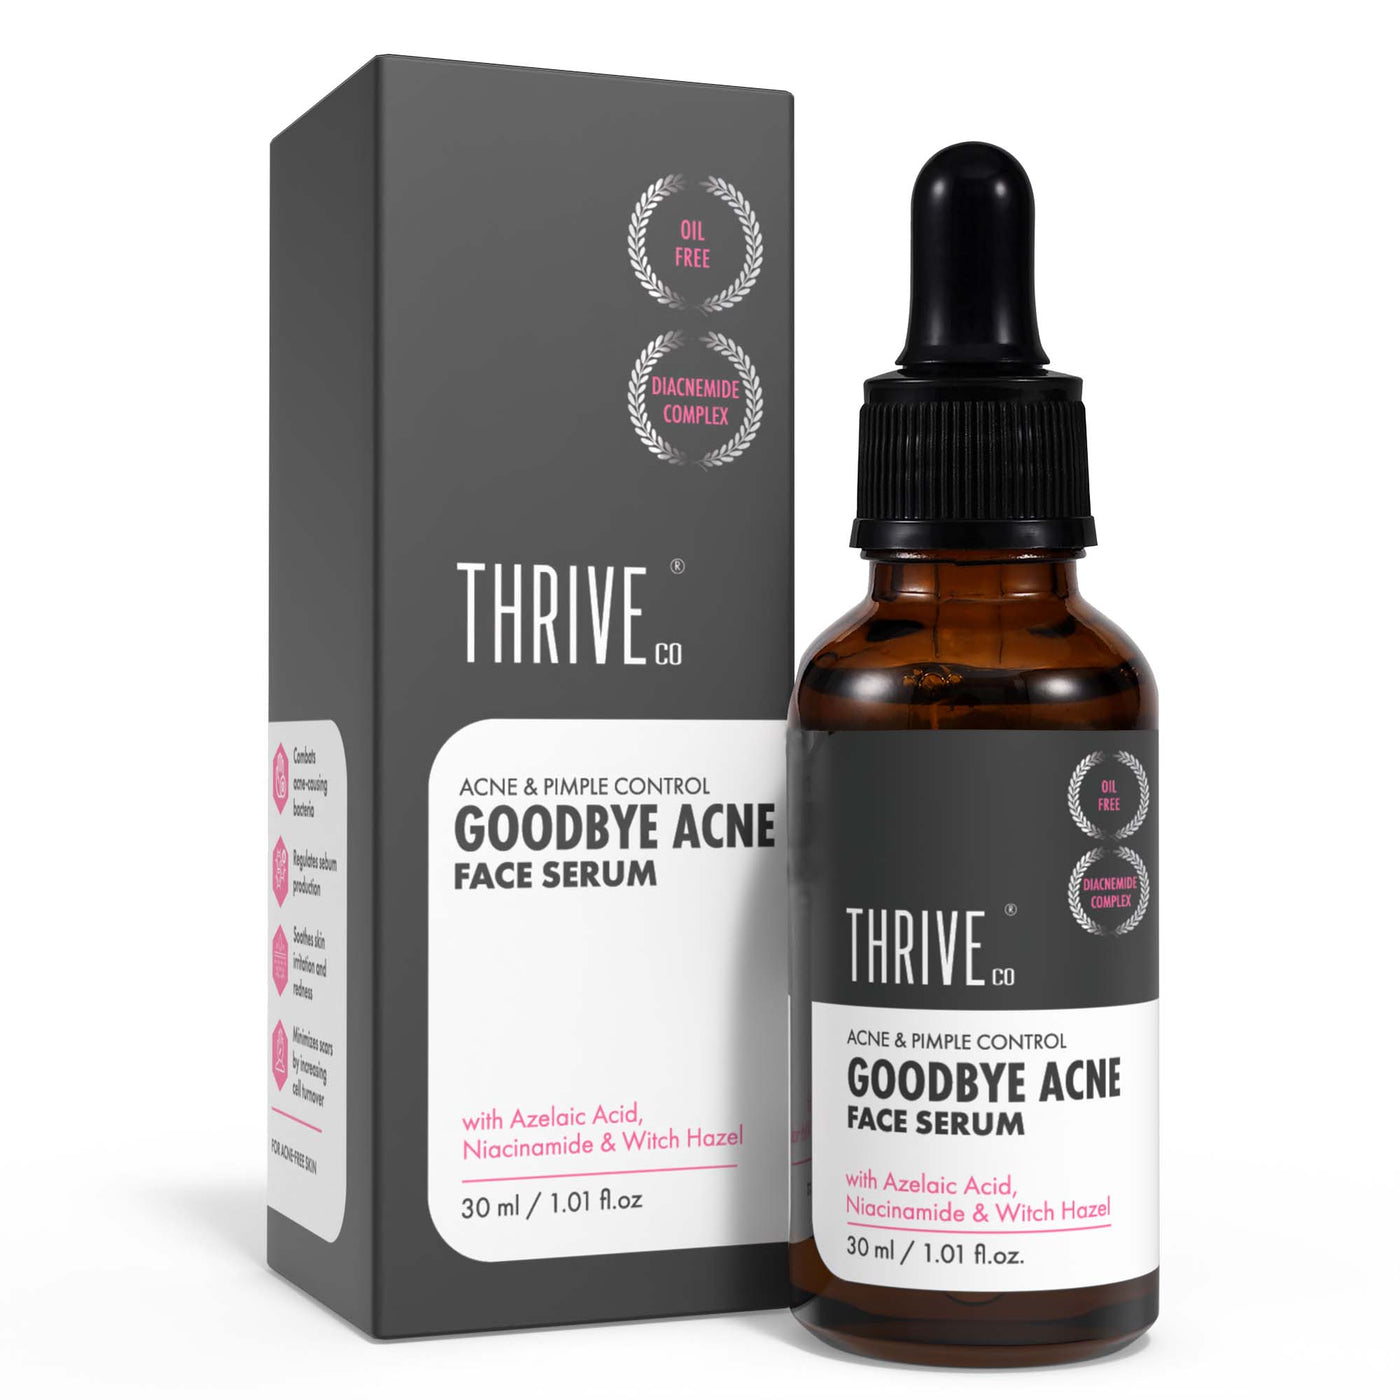 ThriveCo Goodbye Acne Face Serum for Pimples | Reduces Acne-Causing Bacteria & Sebum Production | Oil-Free Anti-Acne Serum with DiacnemideTM, Azelaic Acid, Niacinamide & Witch Hazel | For Women & Men | 30ml